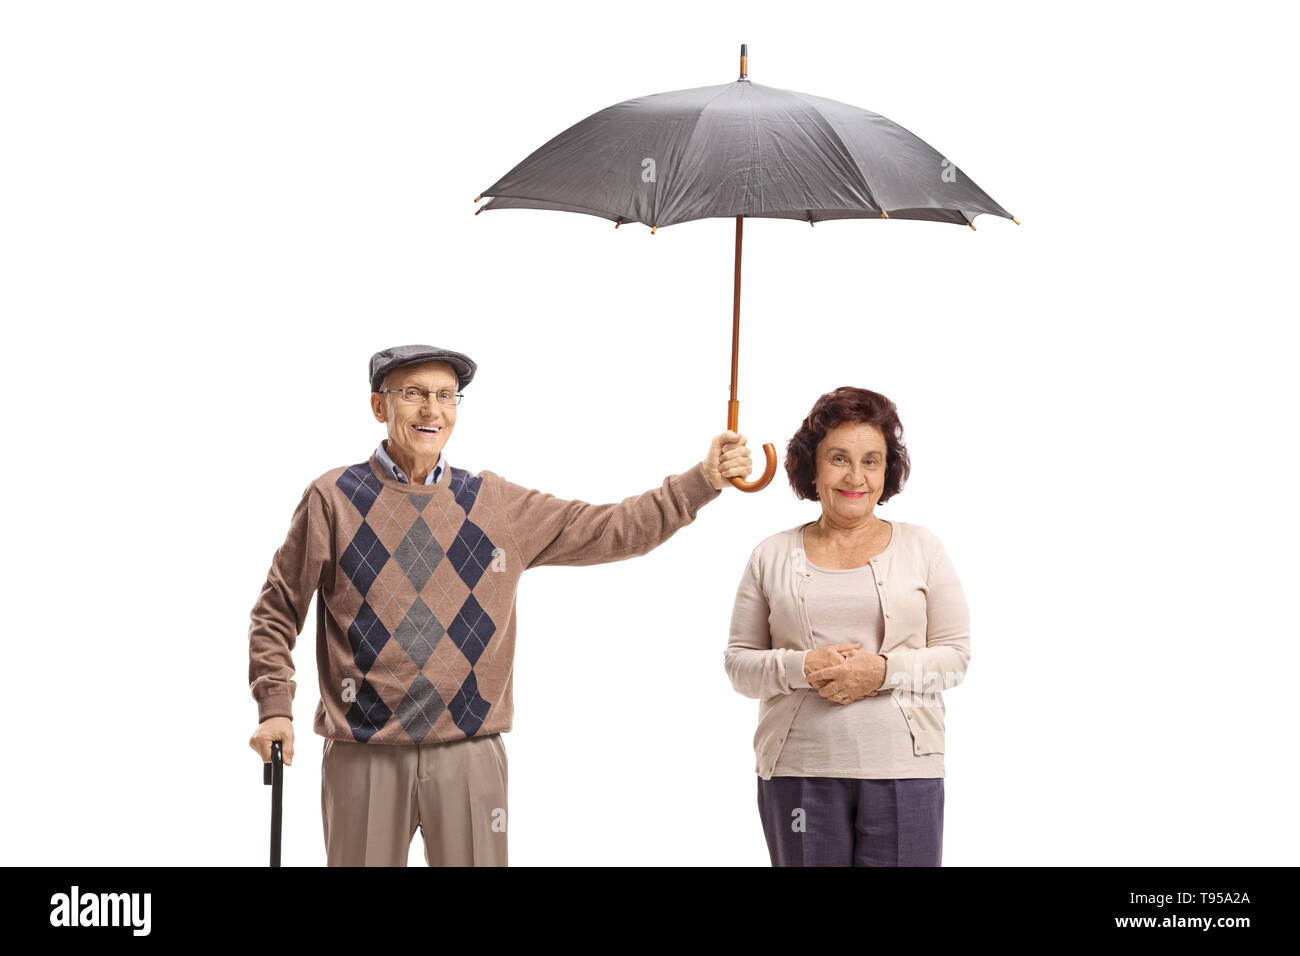 People Woman Lady Holding Umbrella Cut Out Stock Images Pictures Alamy